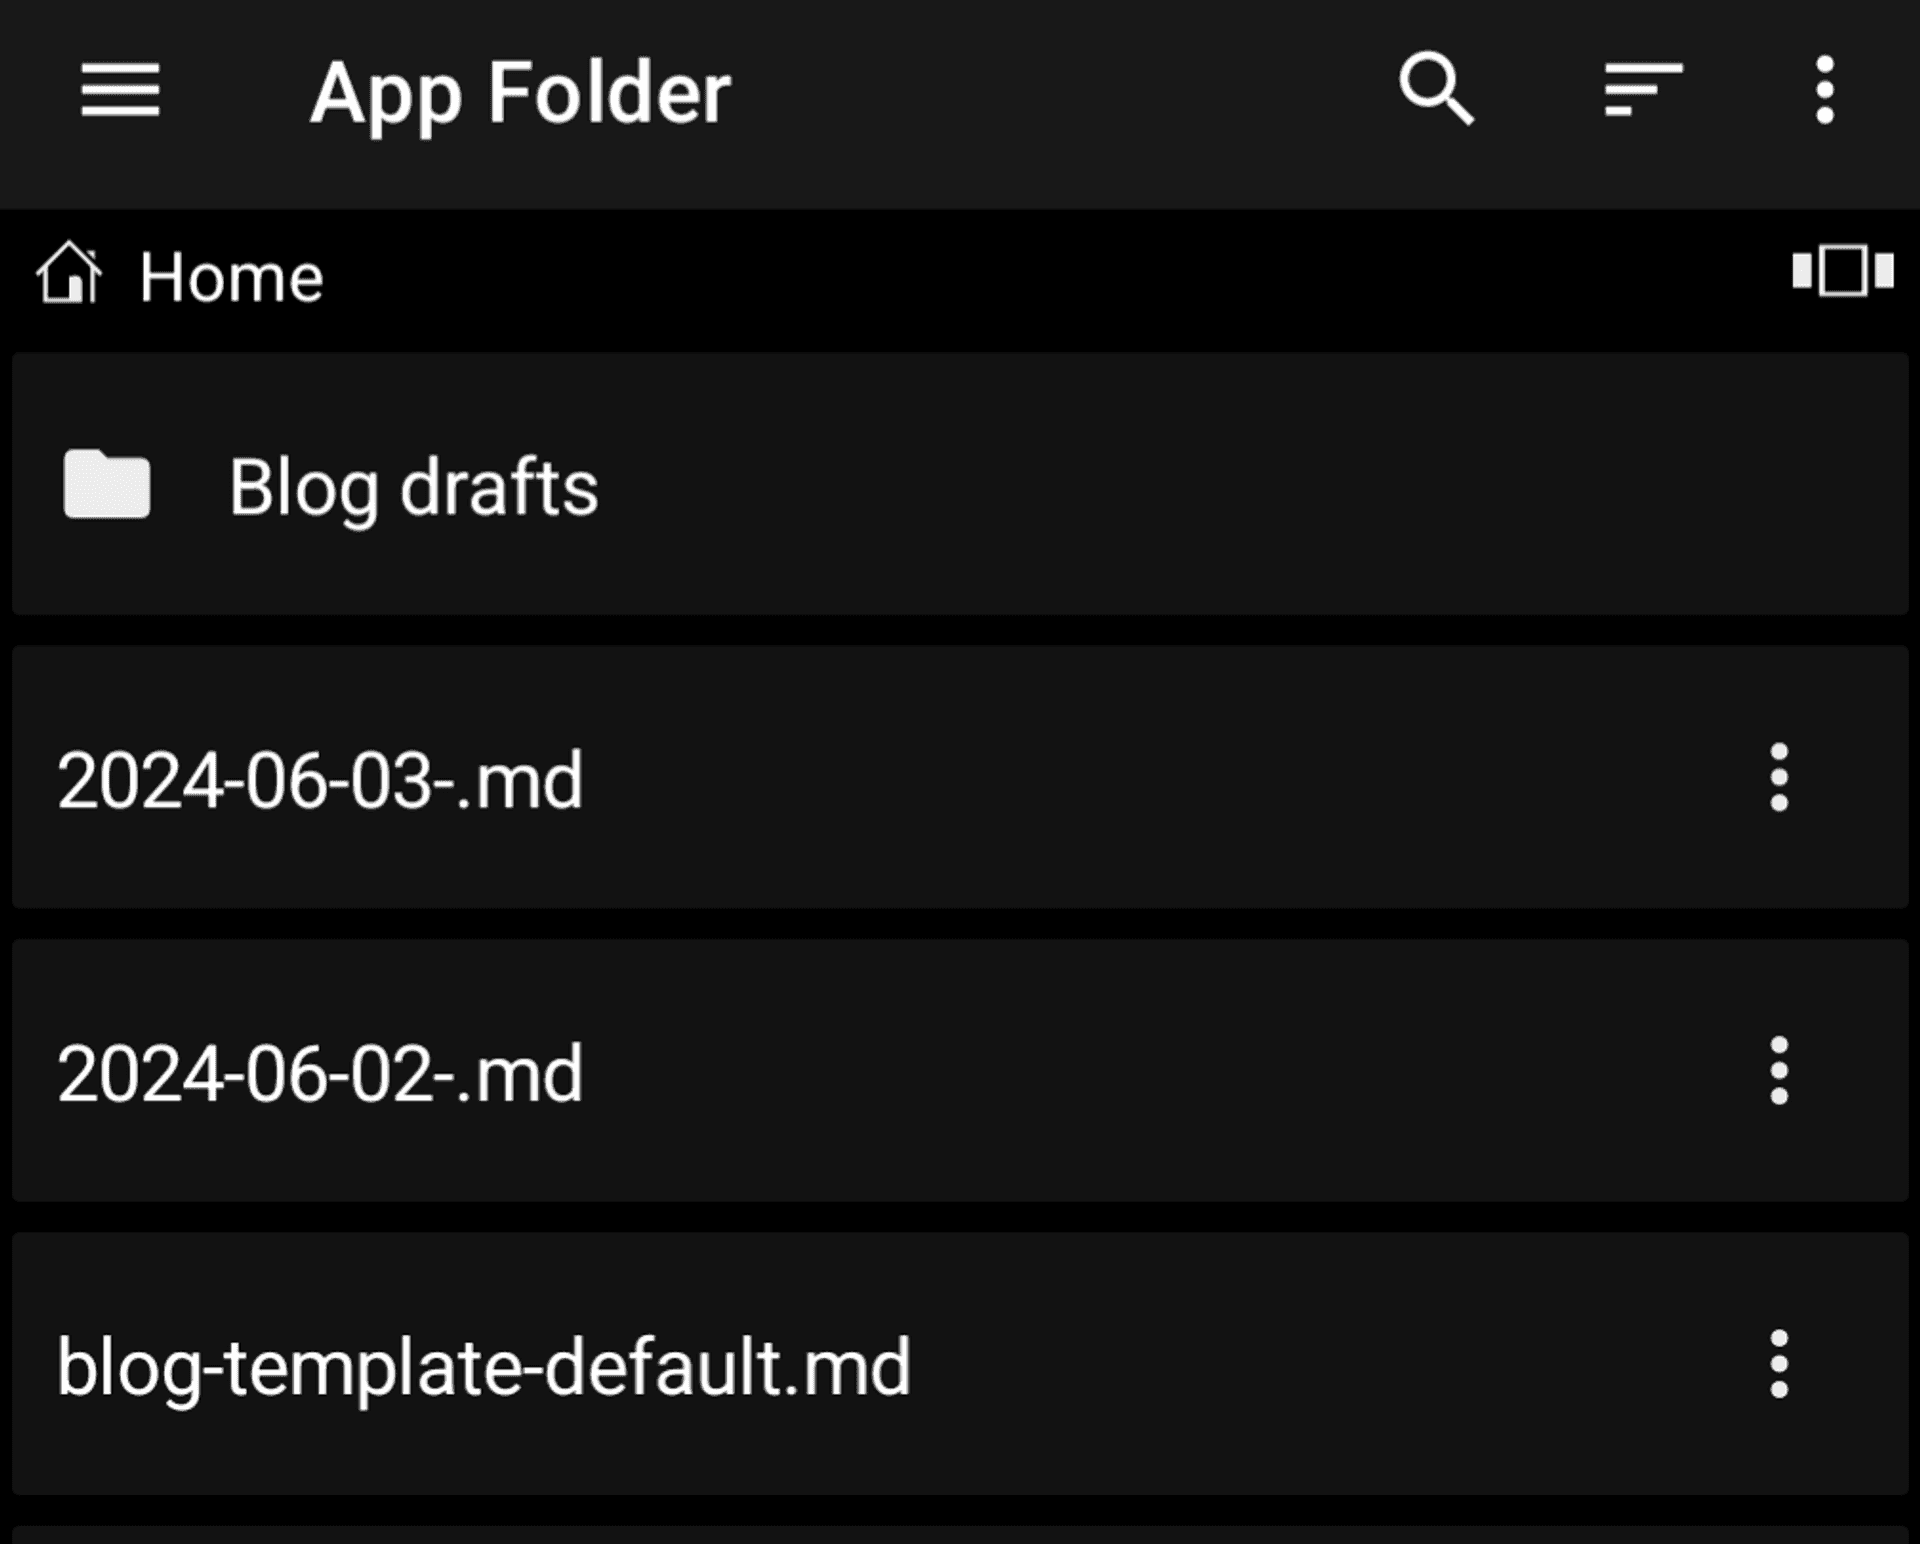 Screenshot of the Zettel Notes app on Android. Shows the main "App Folder" directory listing where I keep my blog drafts and templates.